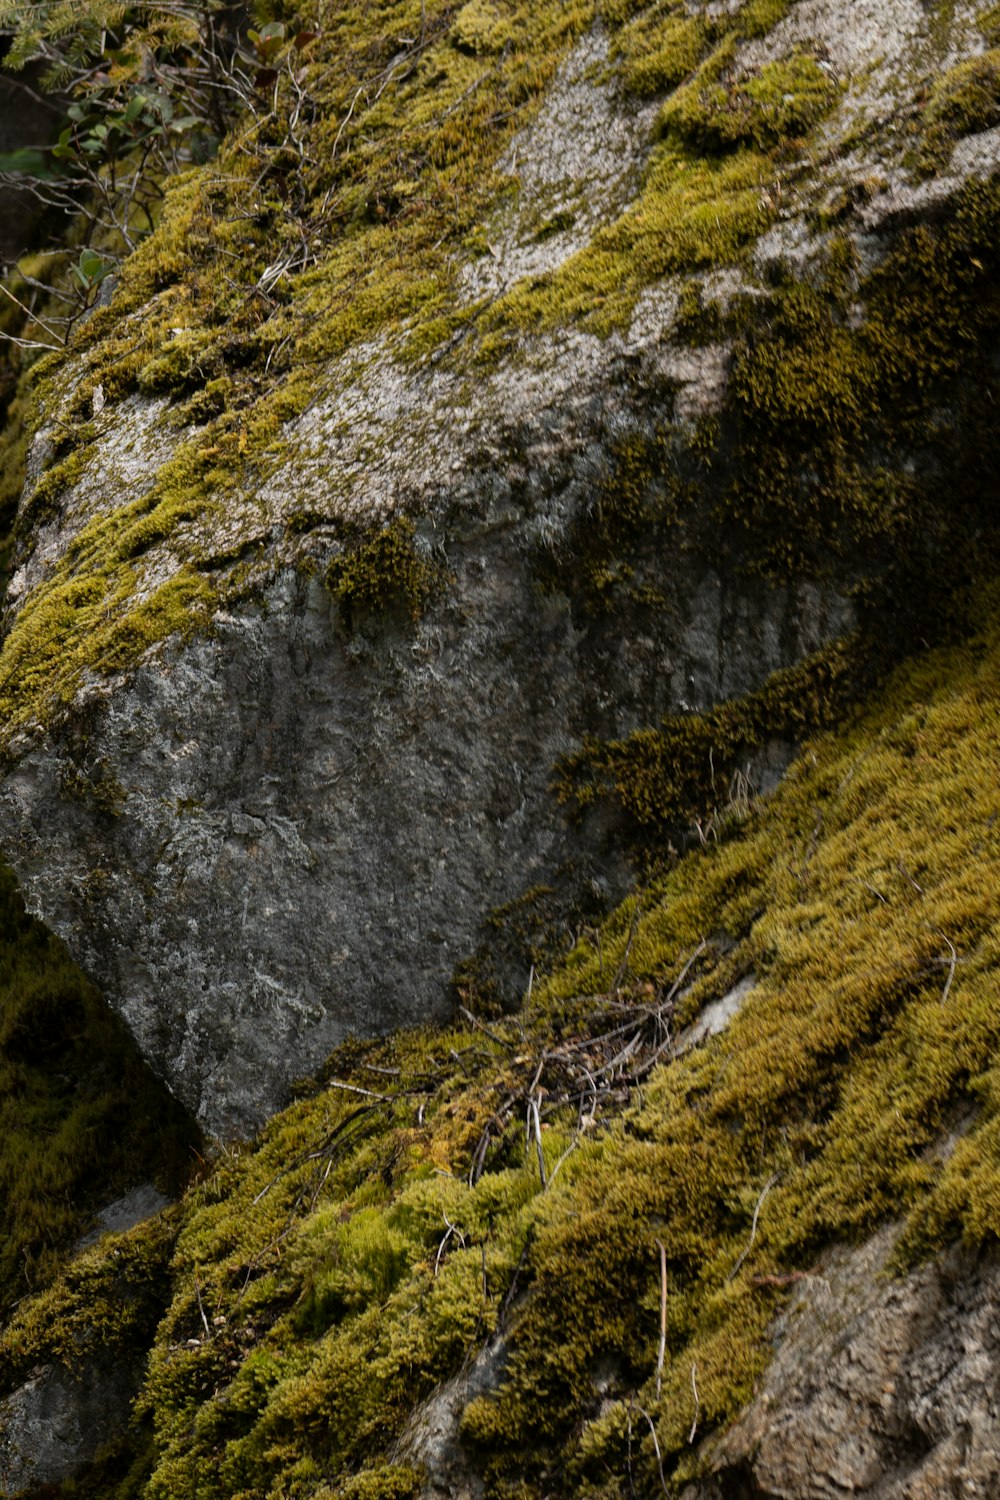 a bird is perched on a mossy rock